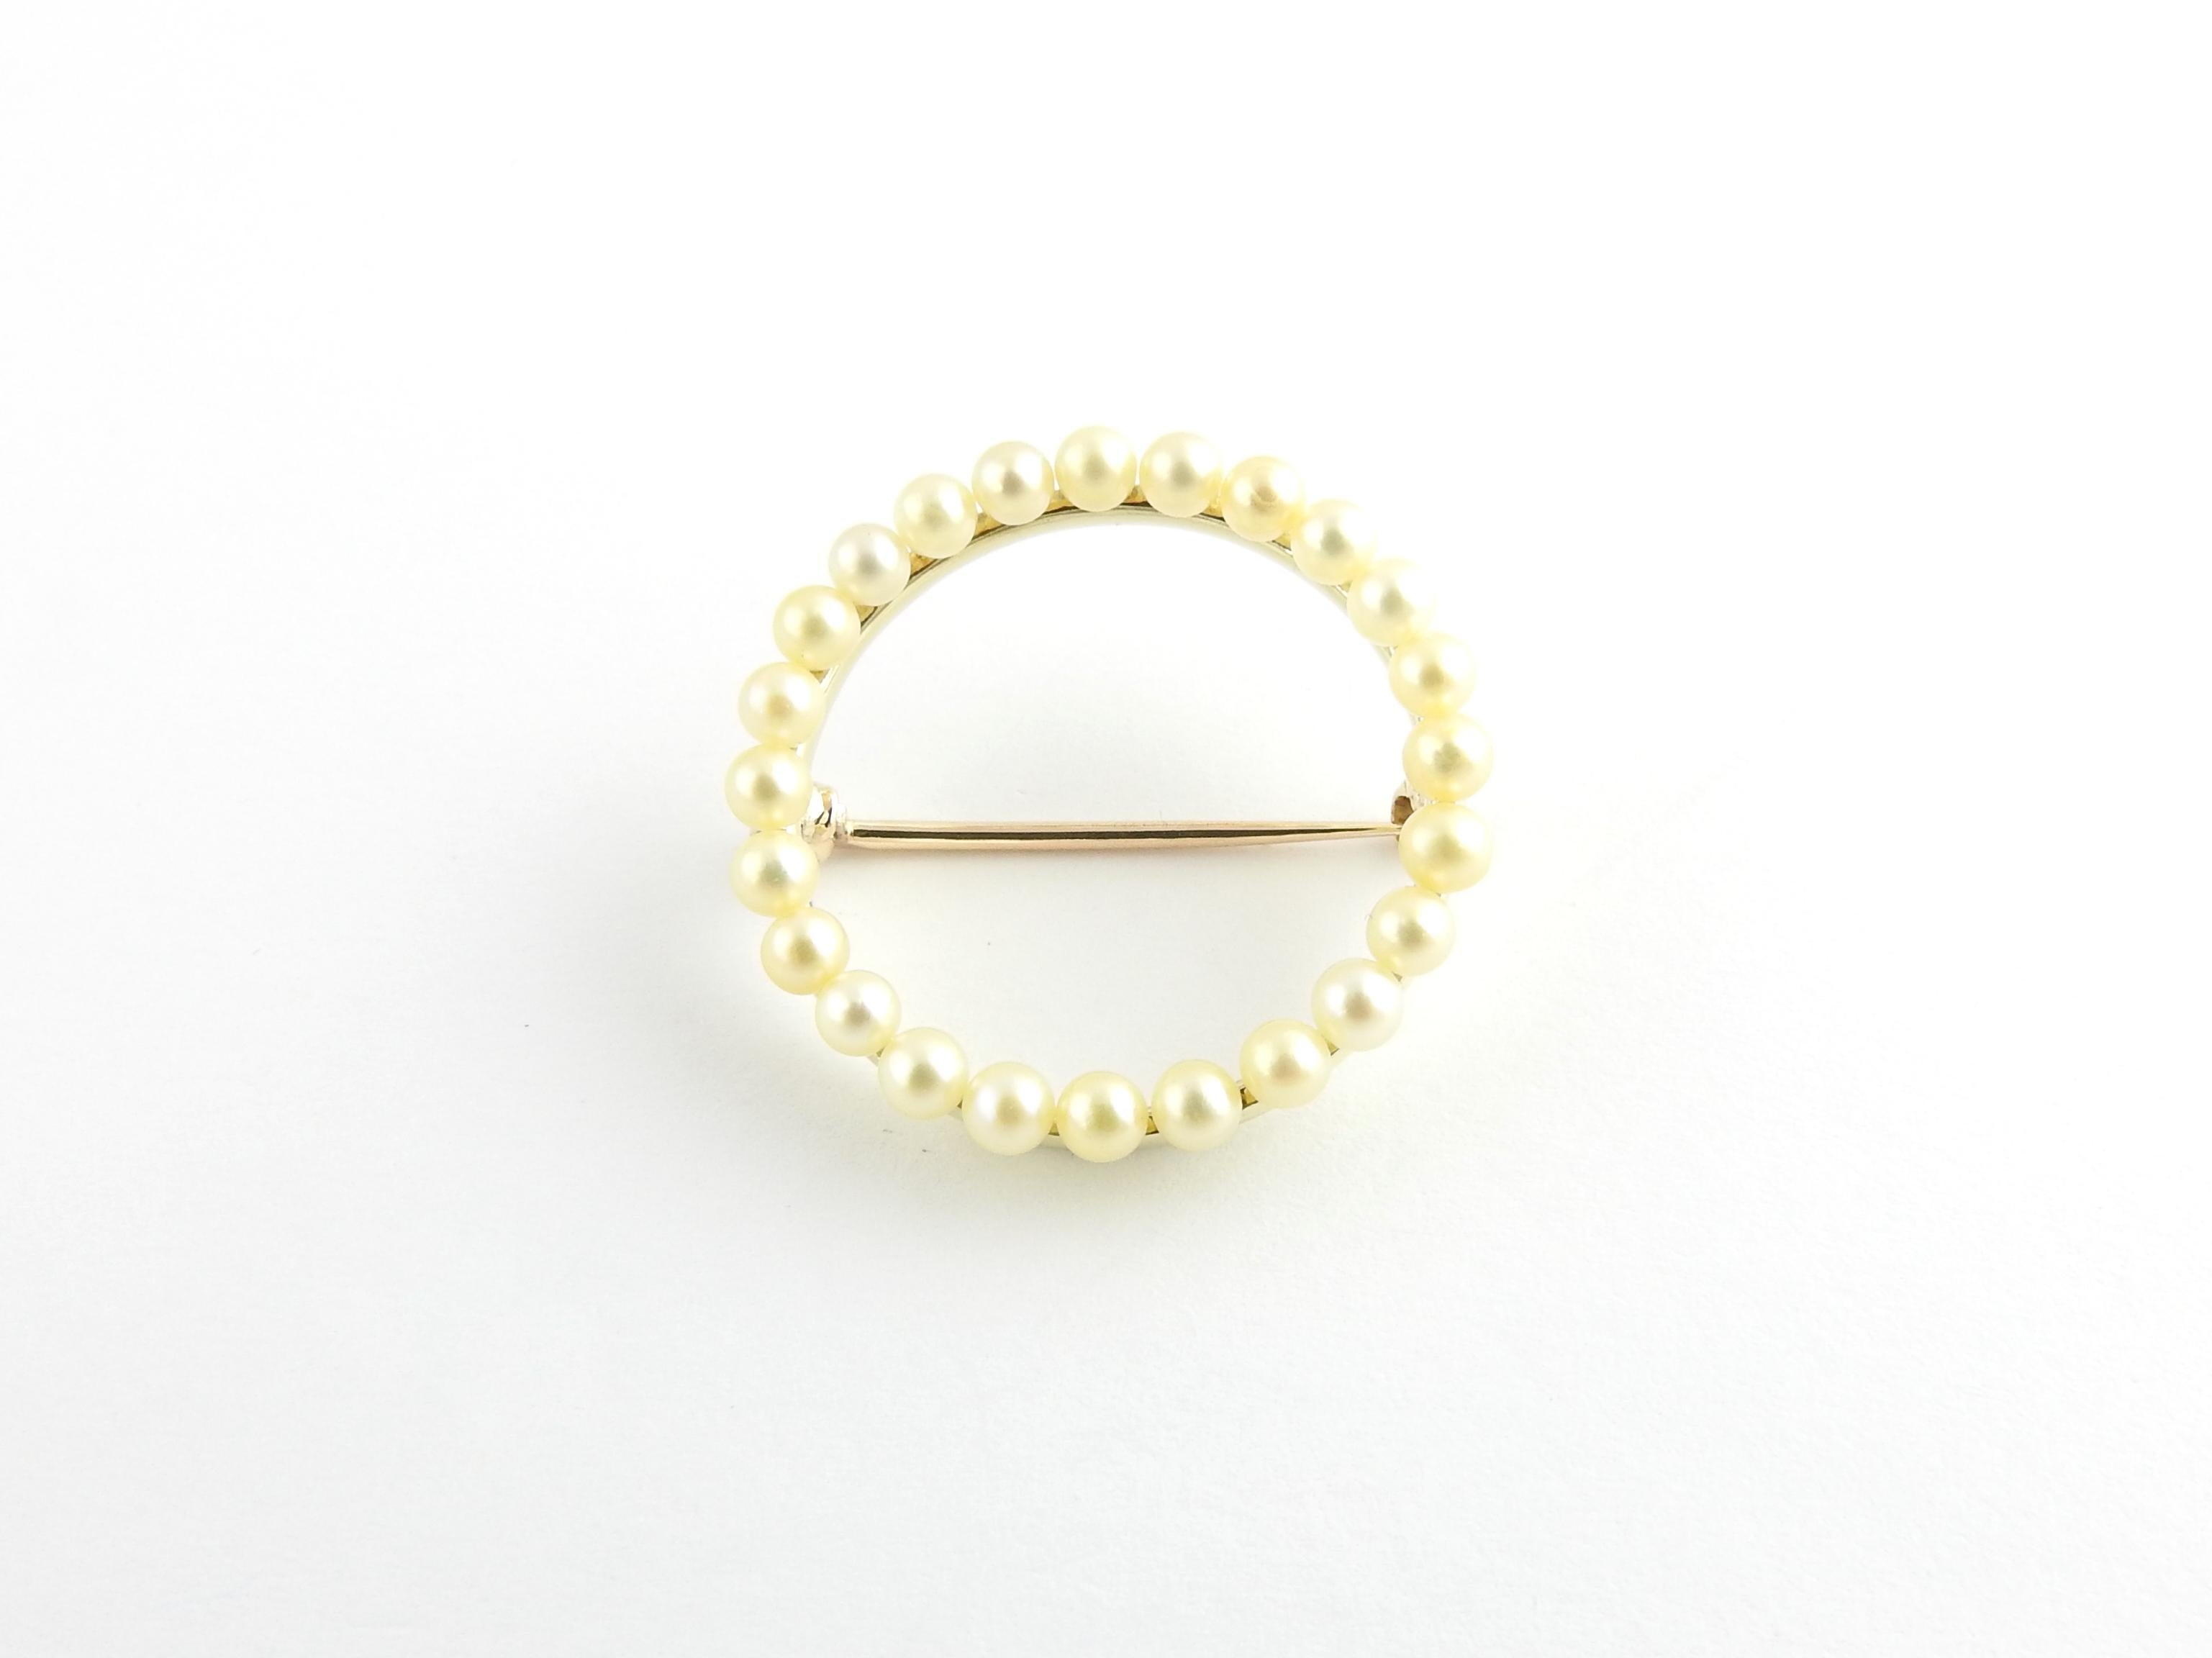 Vintage 14 Karat Yellow Gold and Pearl Brooch Pin/Brooch

This elegant circle pin features 24 round pearls (3 mm each) set in classic 14K yellow gold.

Size: 25 mm

Weight: 2.2 dwt. / 3.5 gr.

Stamped: 14K

Very good condition, professionally